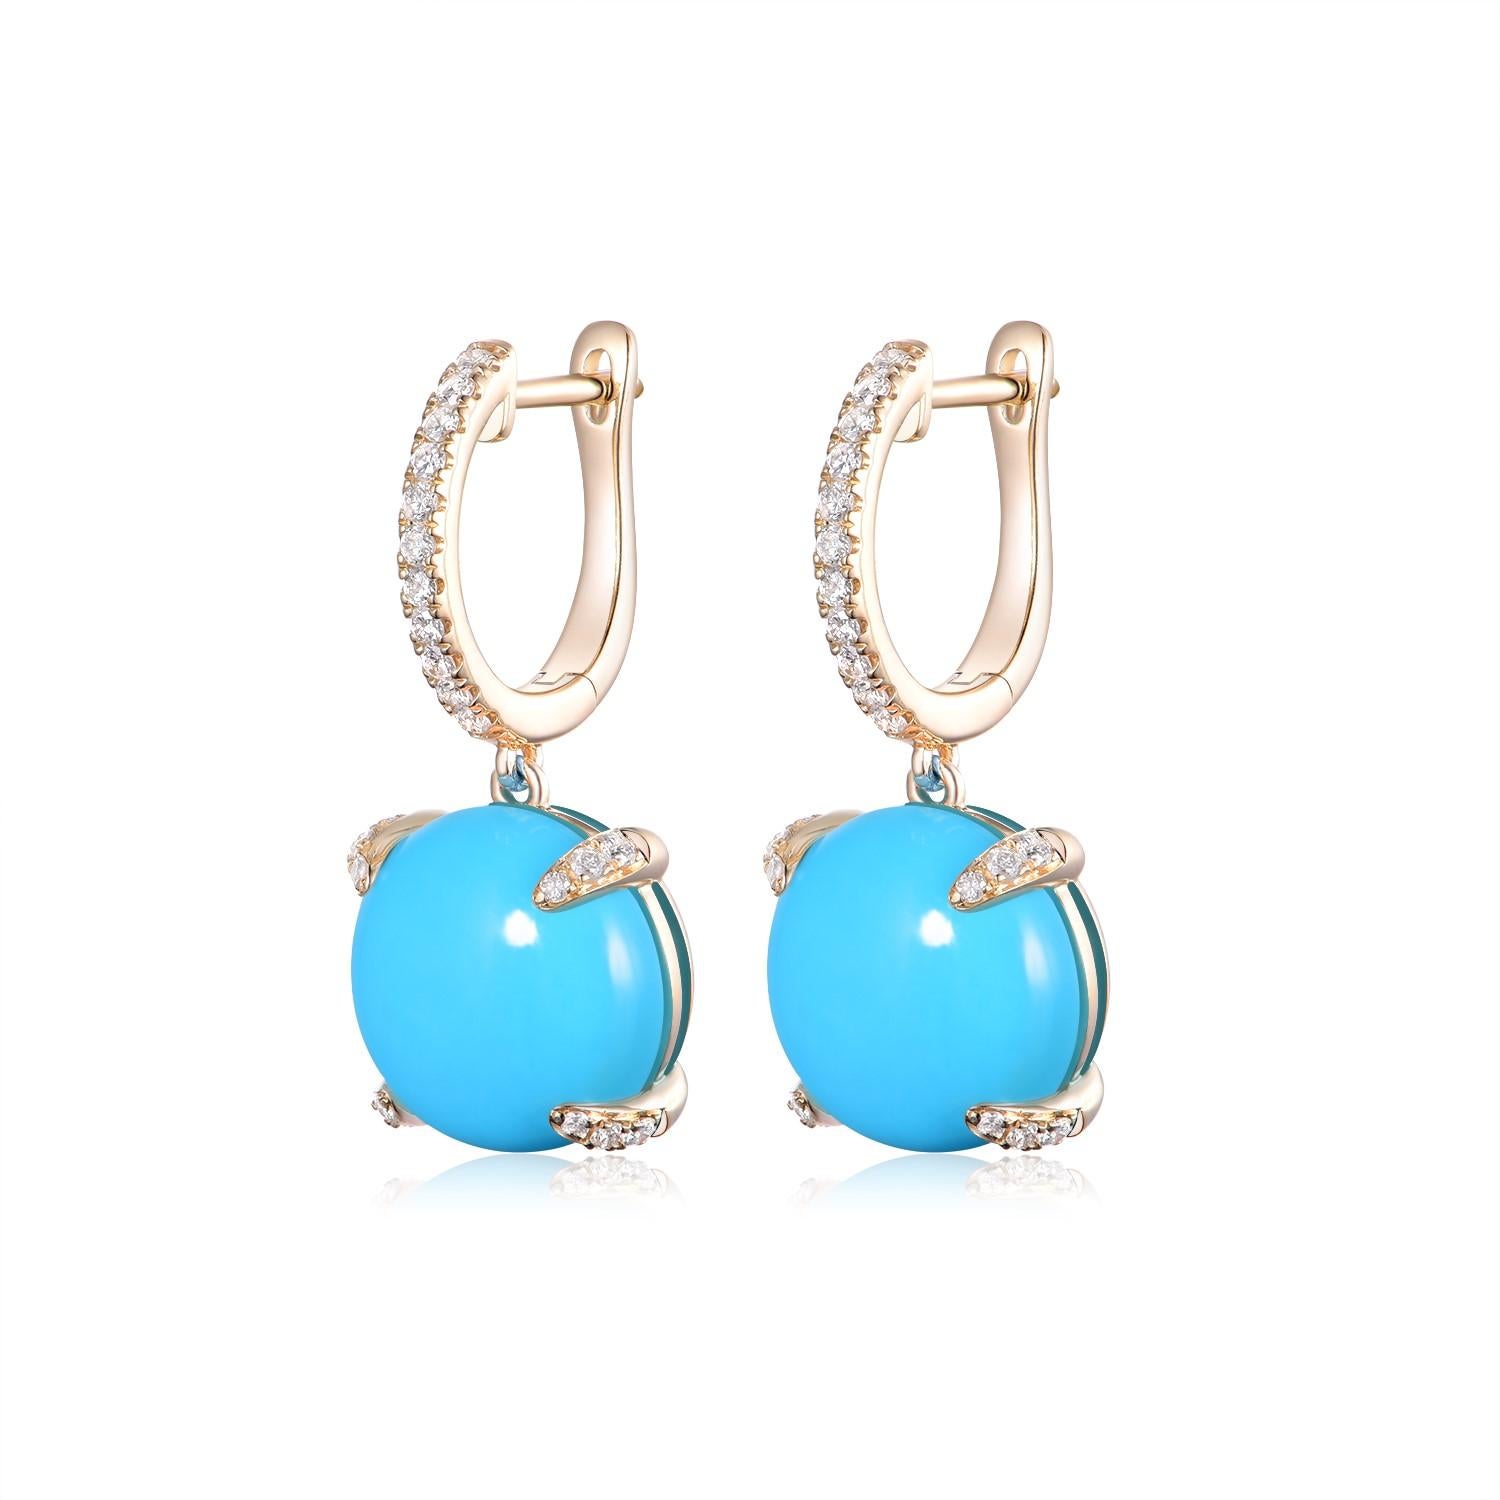 Showcased in this image is a pair of Turquoise and Diamond Drop Earrings in 18K Yellow Gold. Each earring features a substantial 10.10 carat turquoise, presenting a vivid blue hue reminiscent of tropical seas. The turquoise is fashioned into a